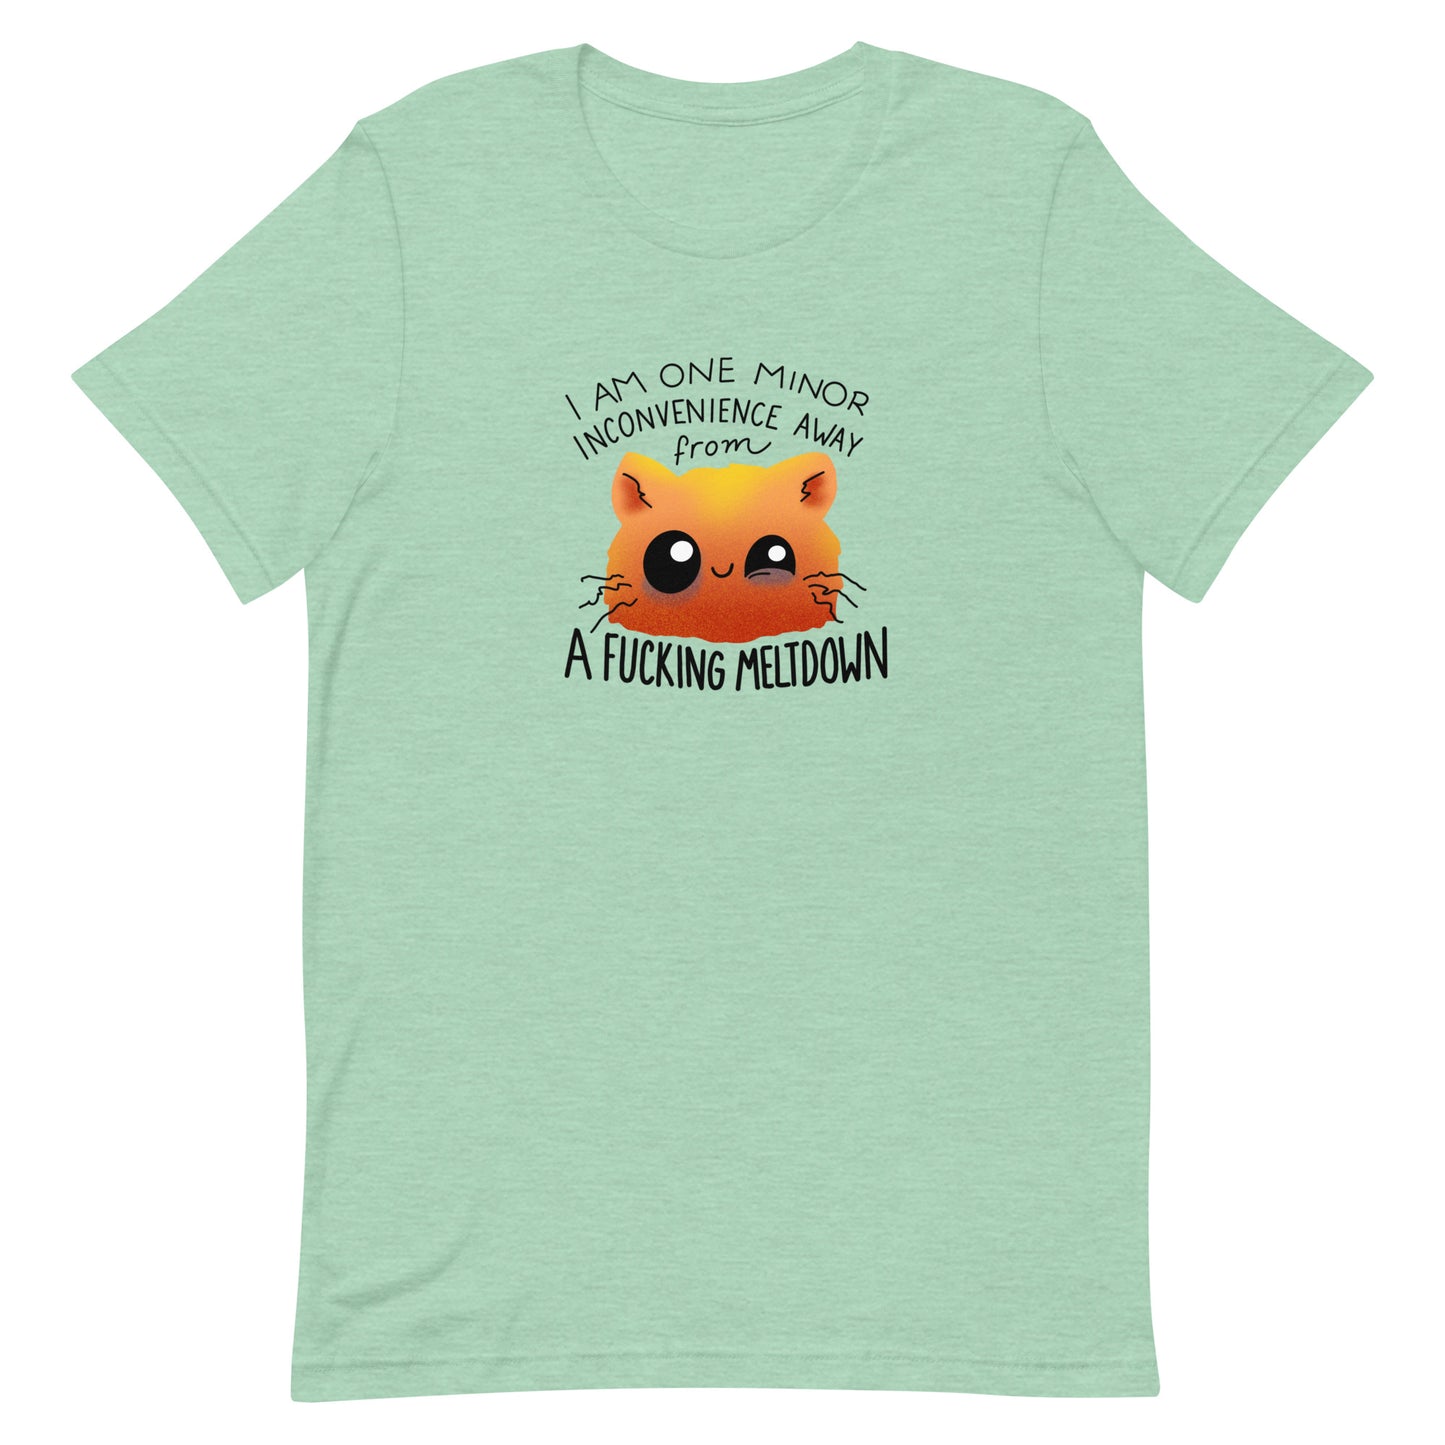 I am One Minor Inconvenience from a Fucking Meltdown T-Shirt